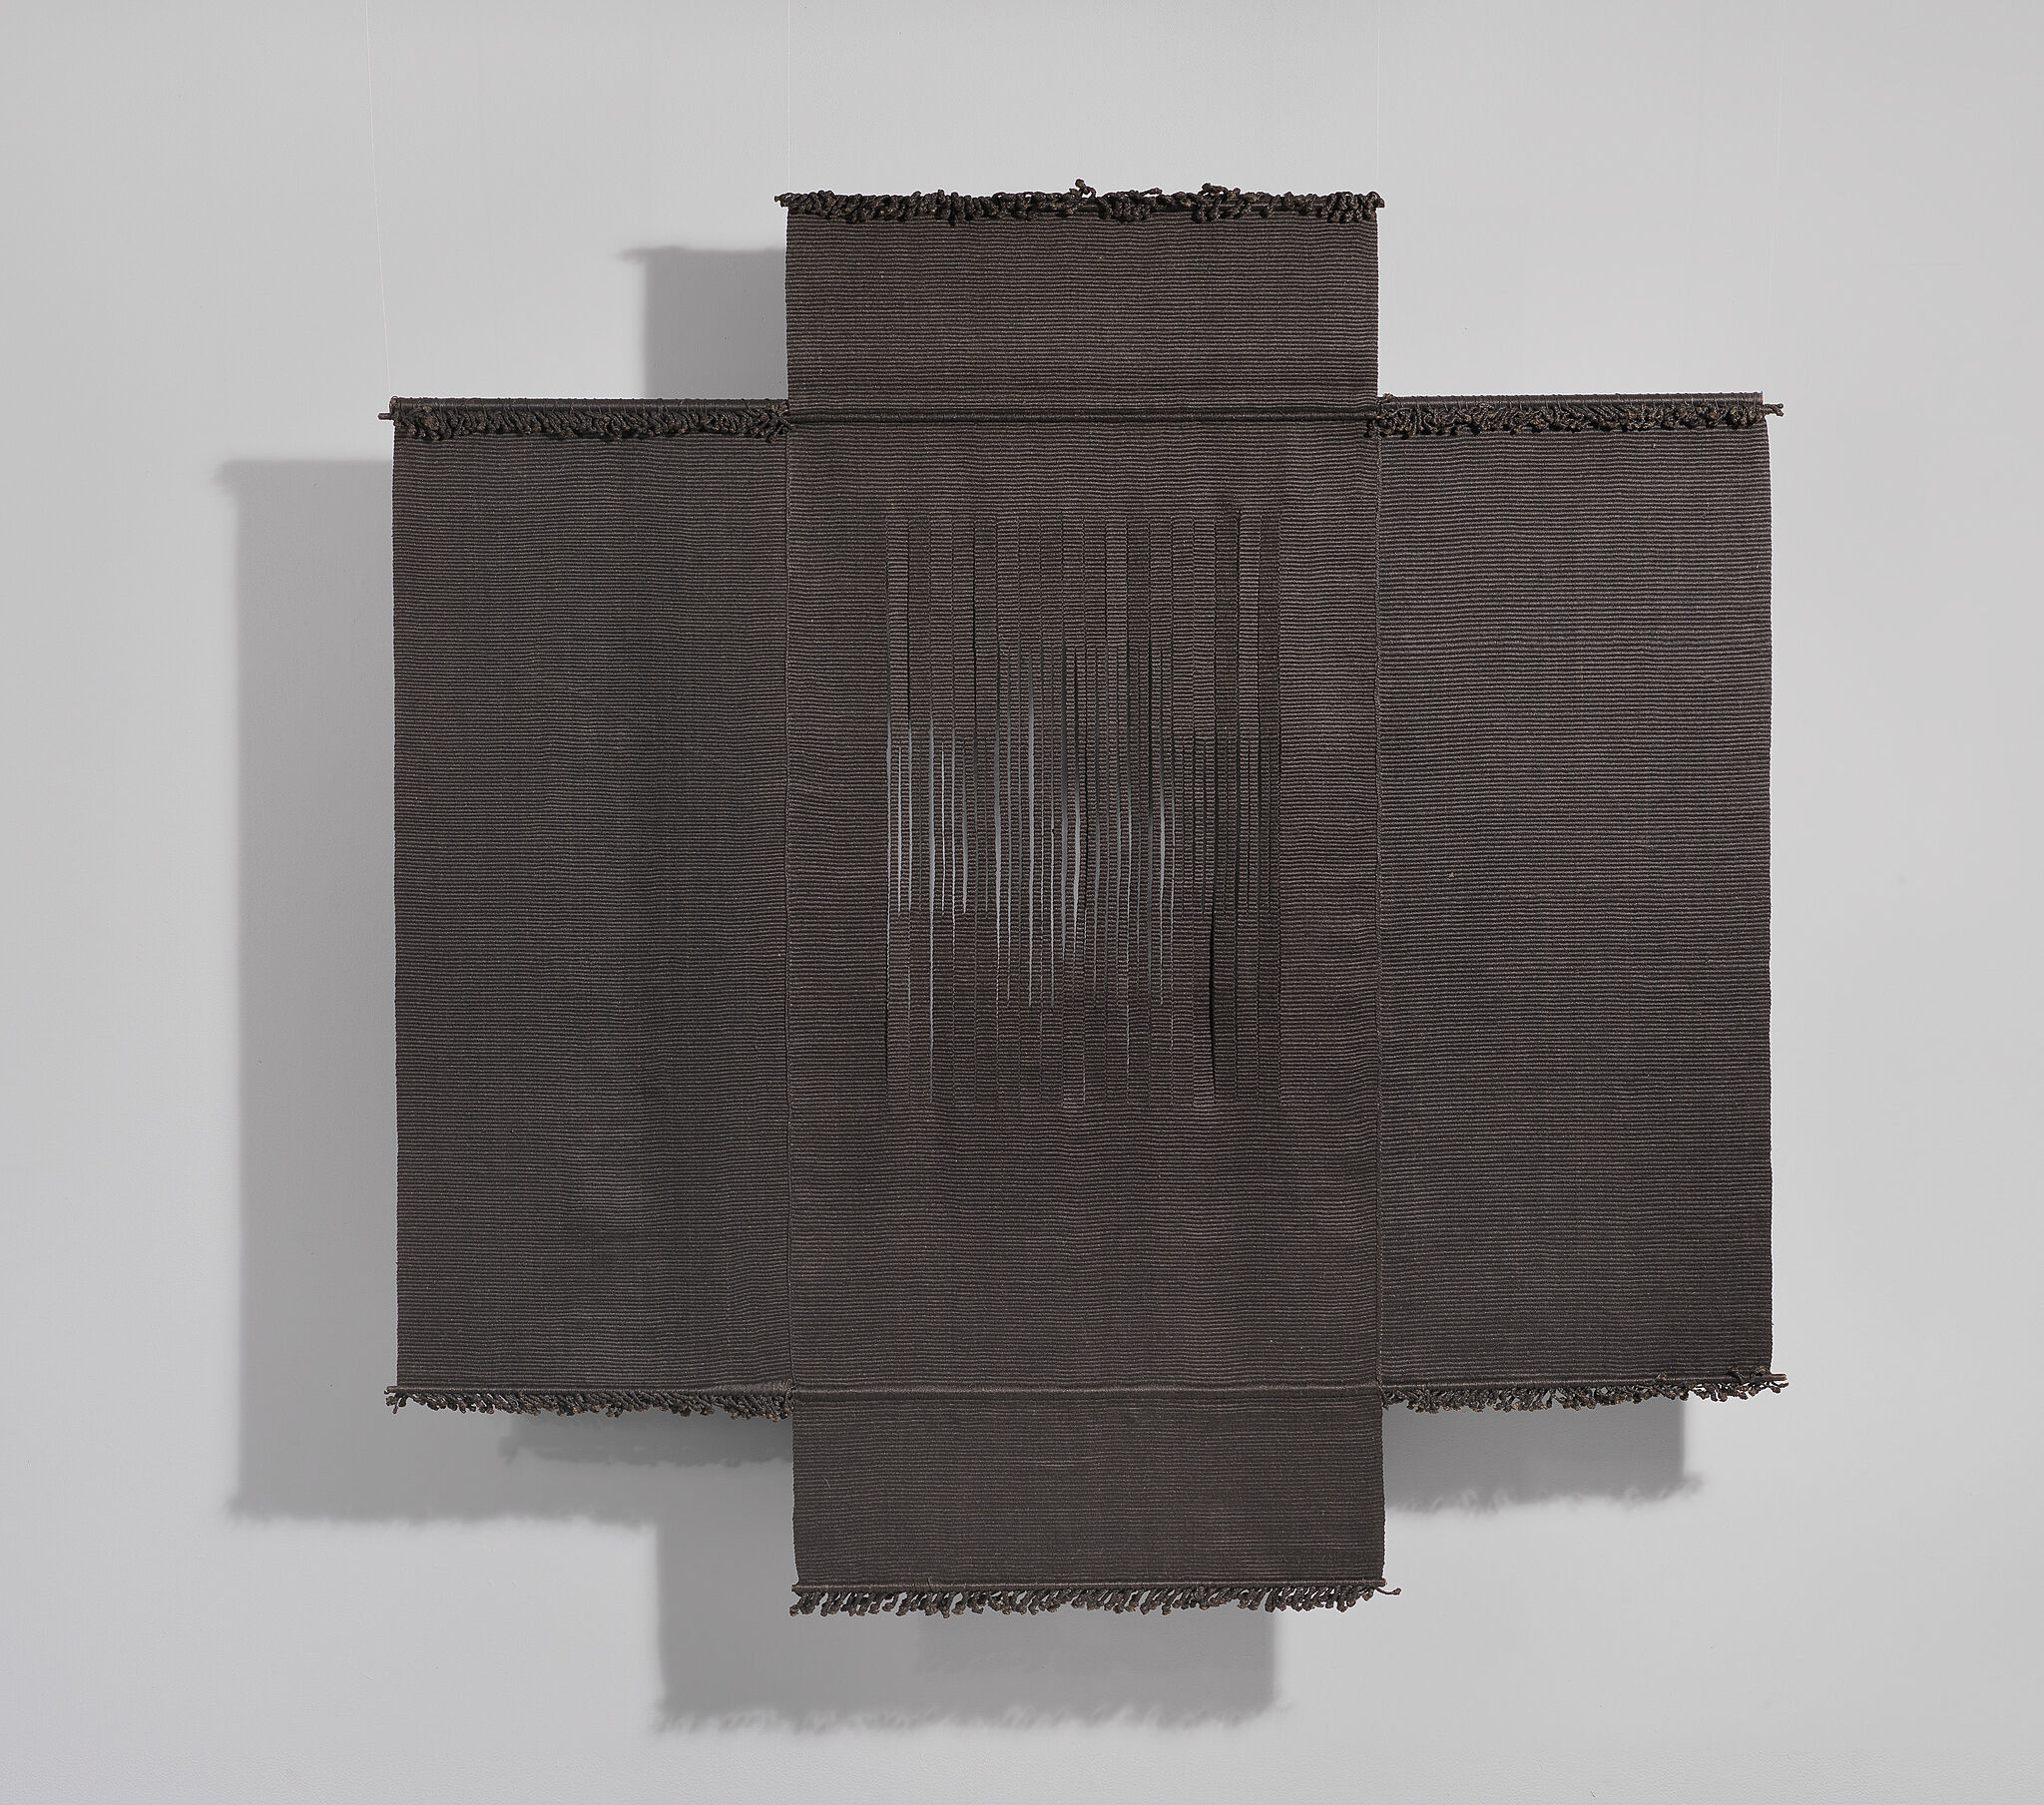 A dark textile hanging on a gallery wall.